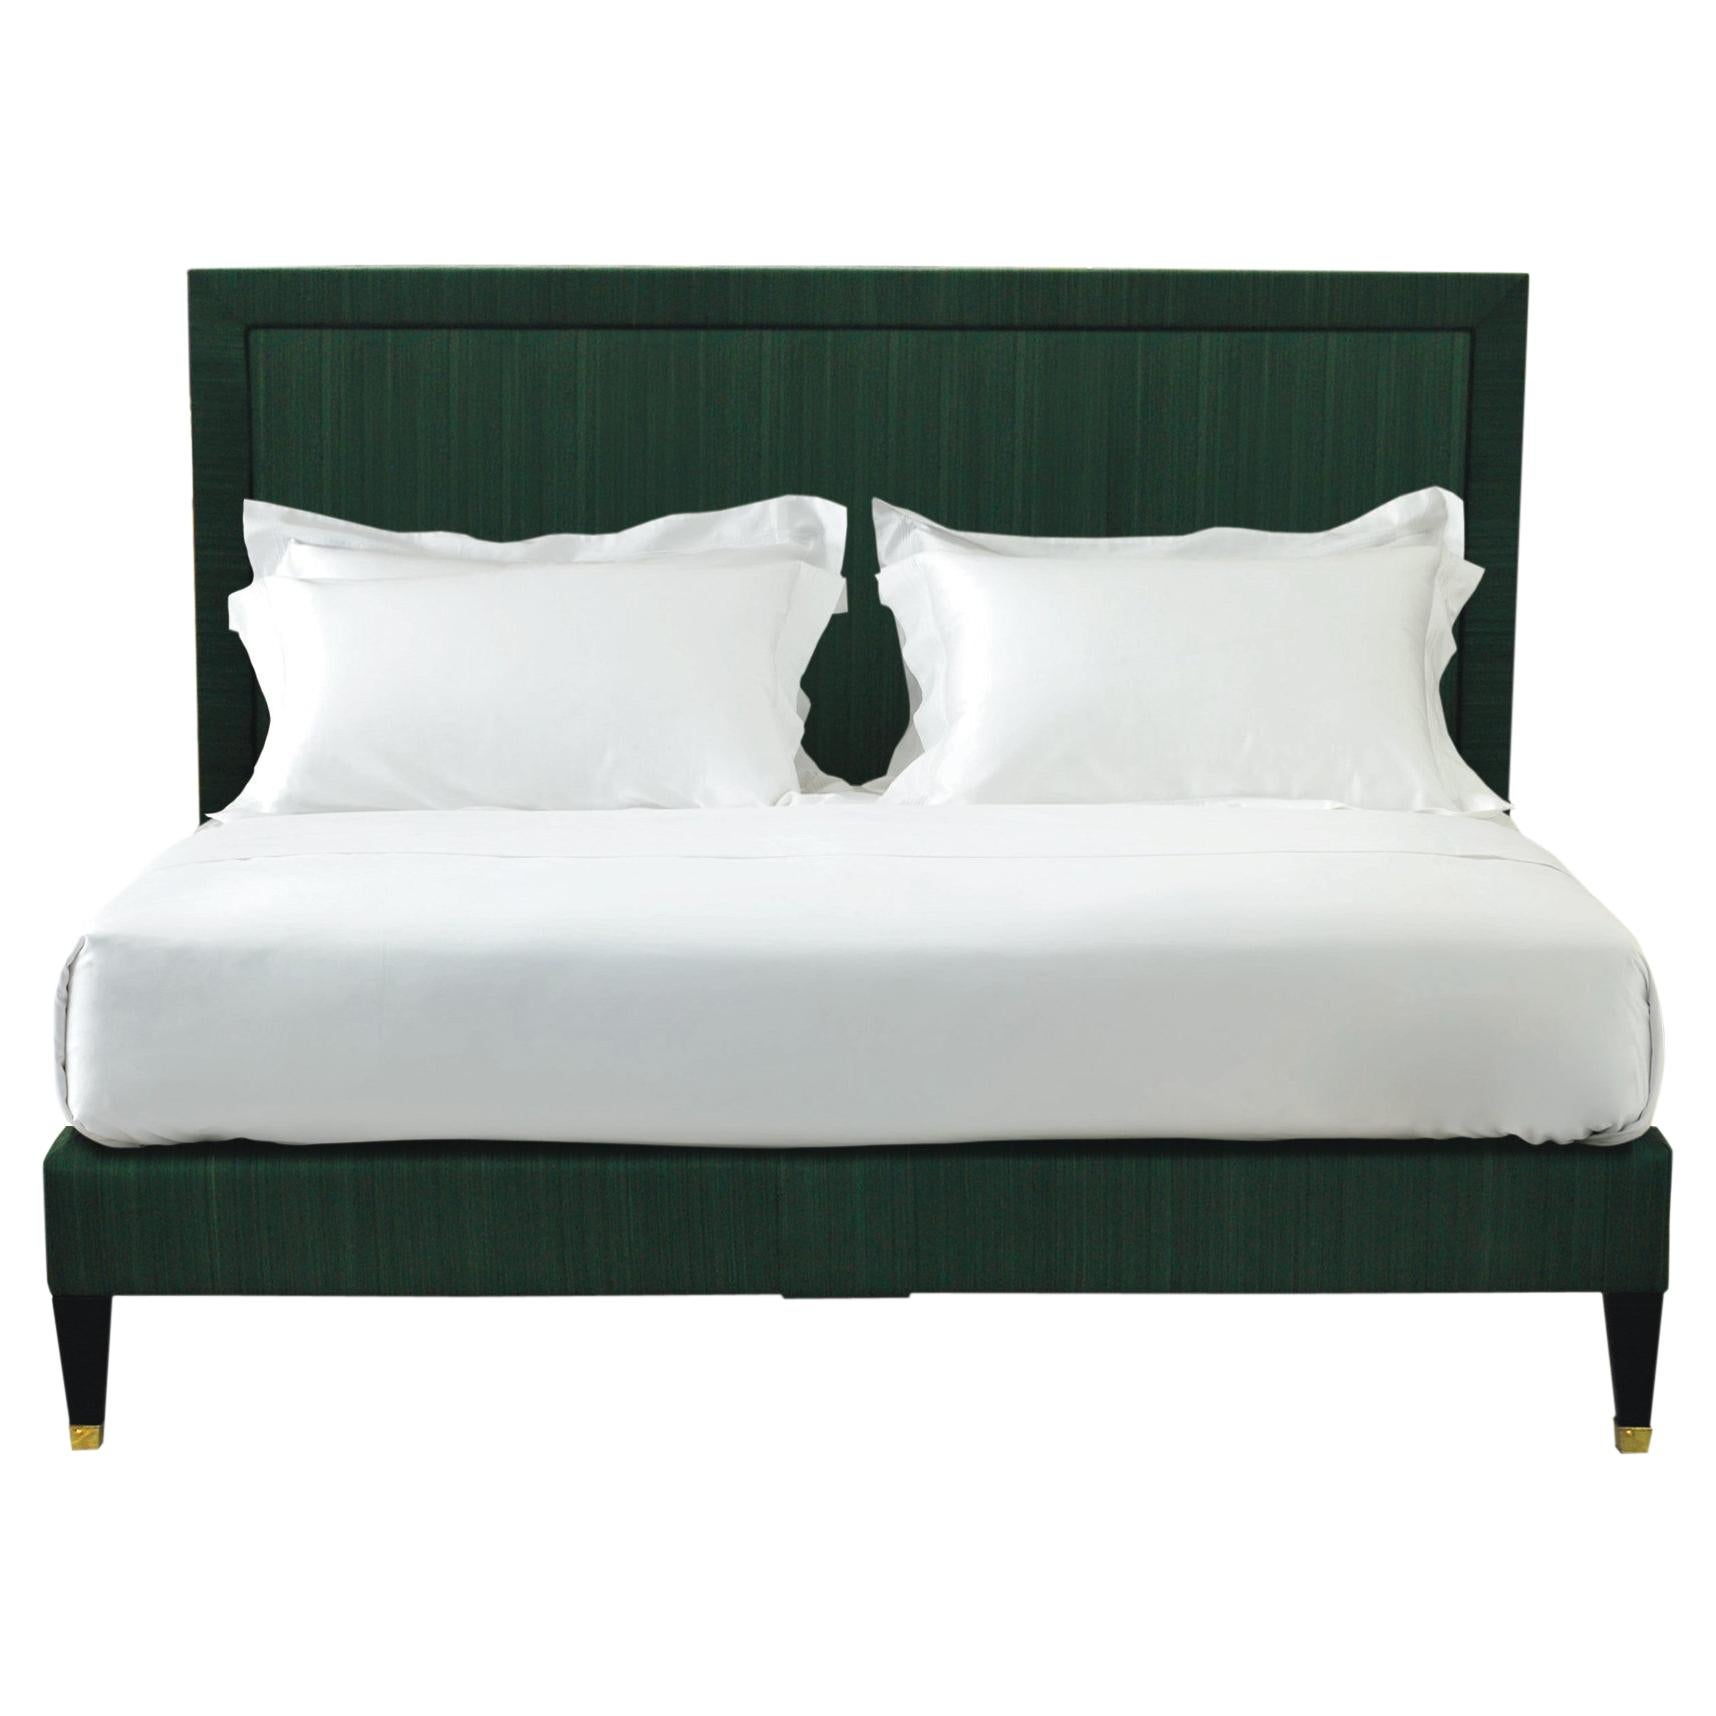 Savoir Virginia & Nº4 Bed Set, Handmade to Order, US California King Size For Sale